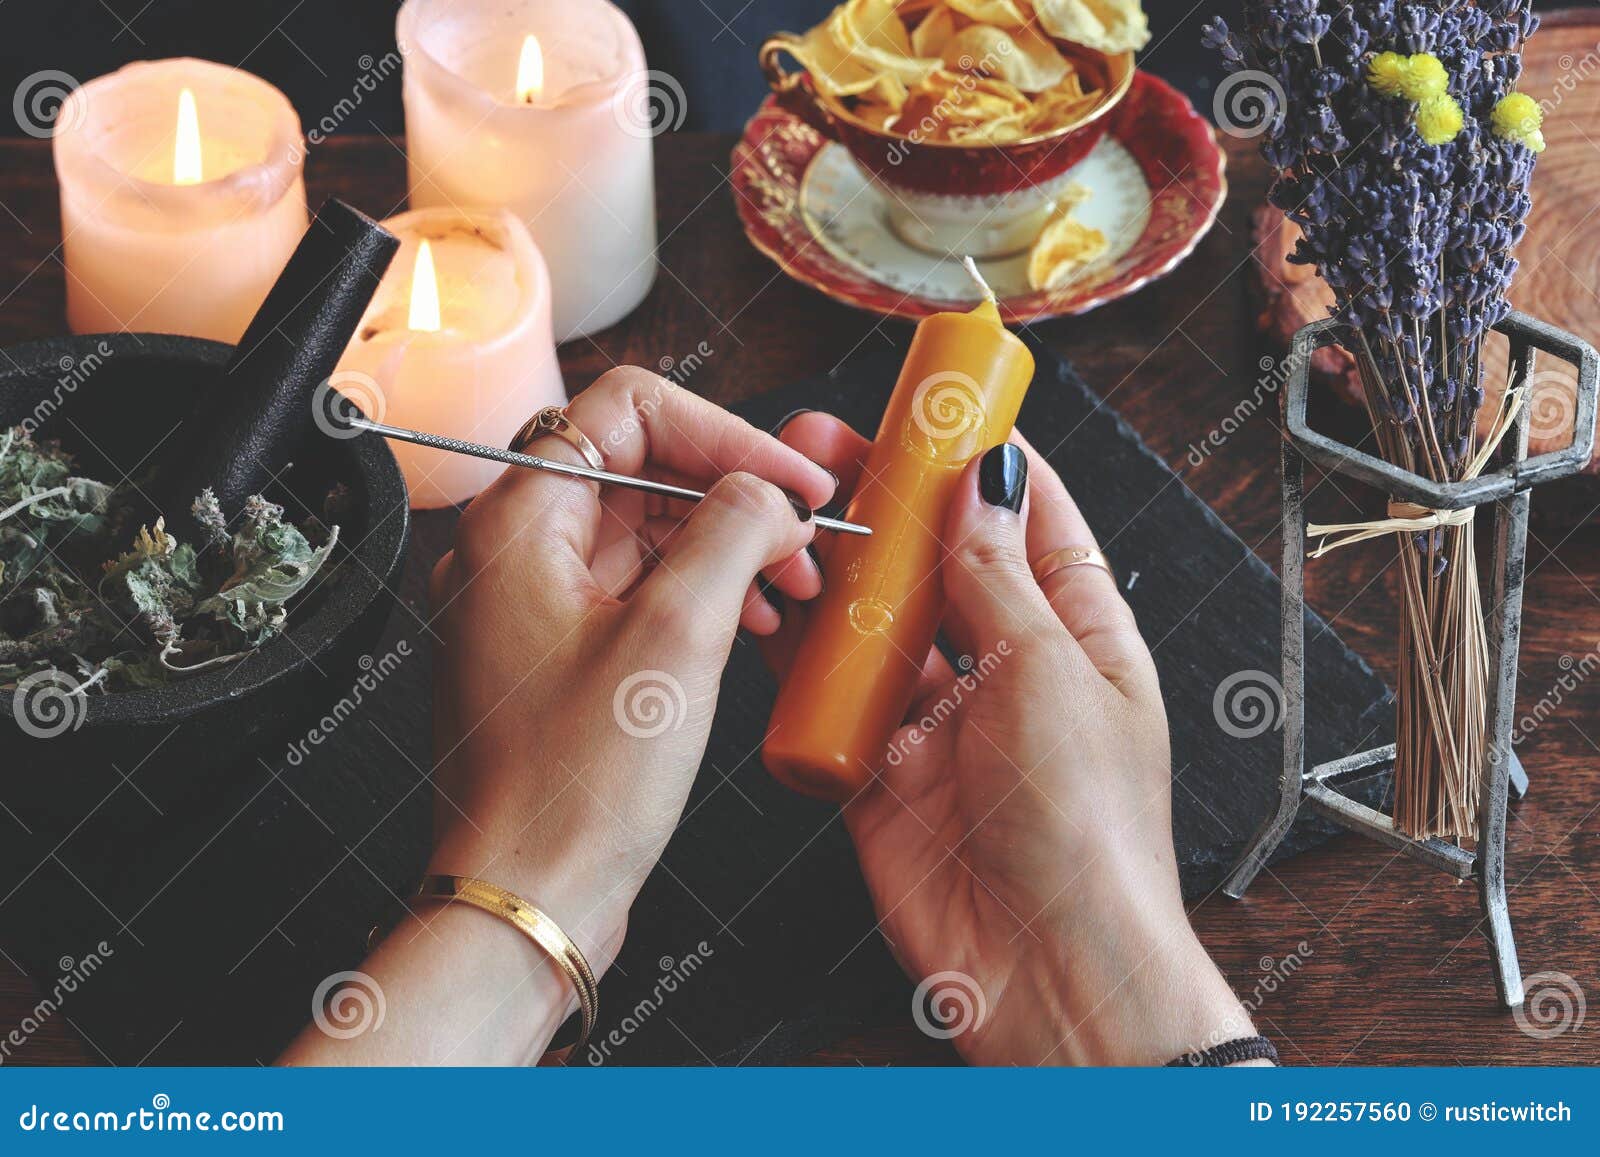 wiccan witch carving s and sigils onto yellow gold color candlestick at her altar